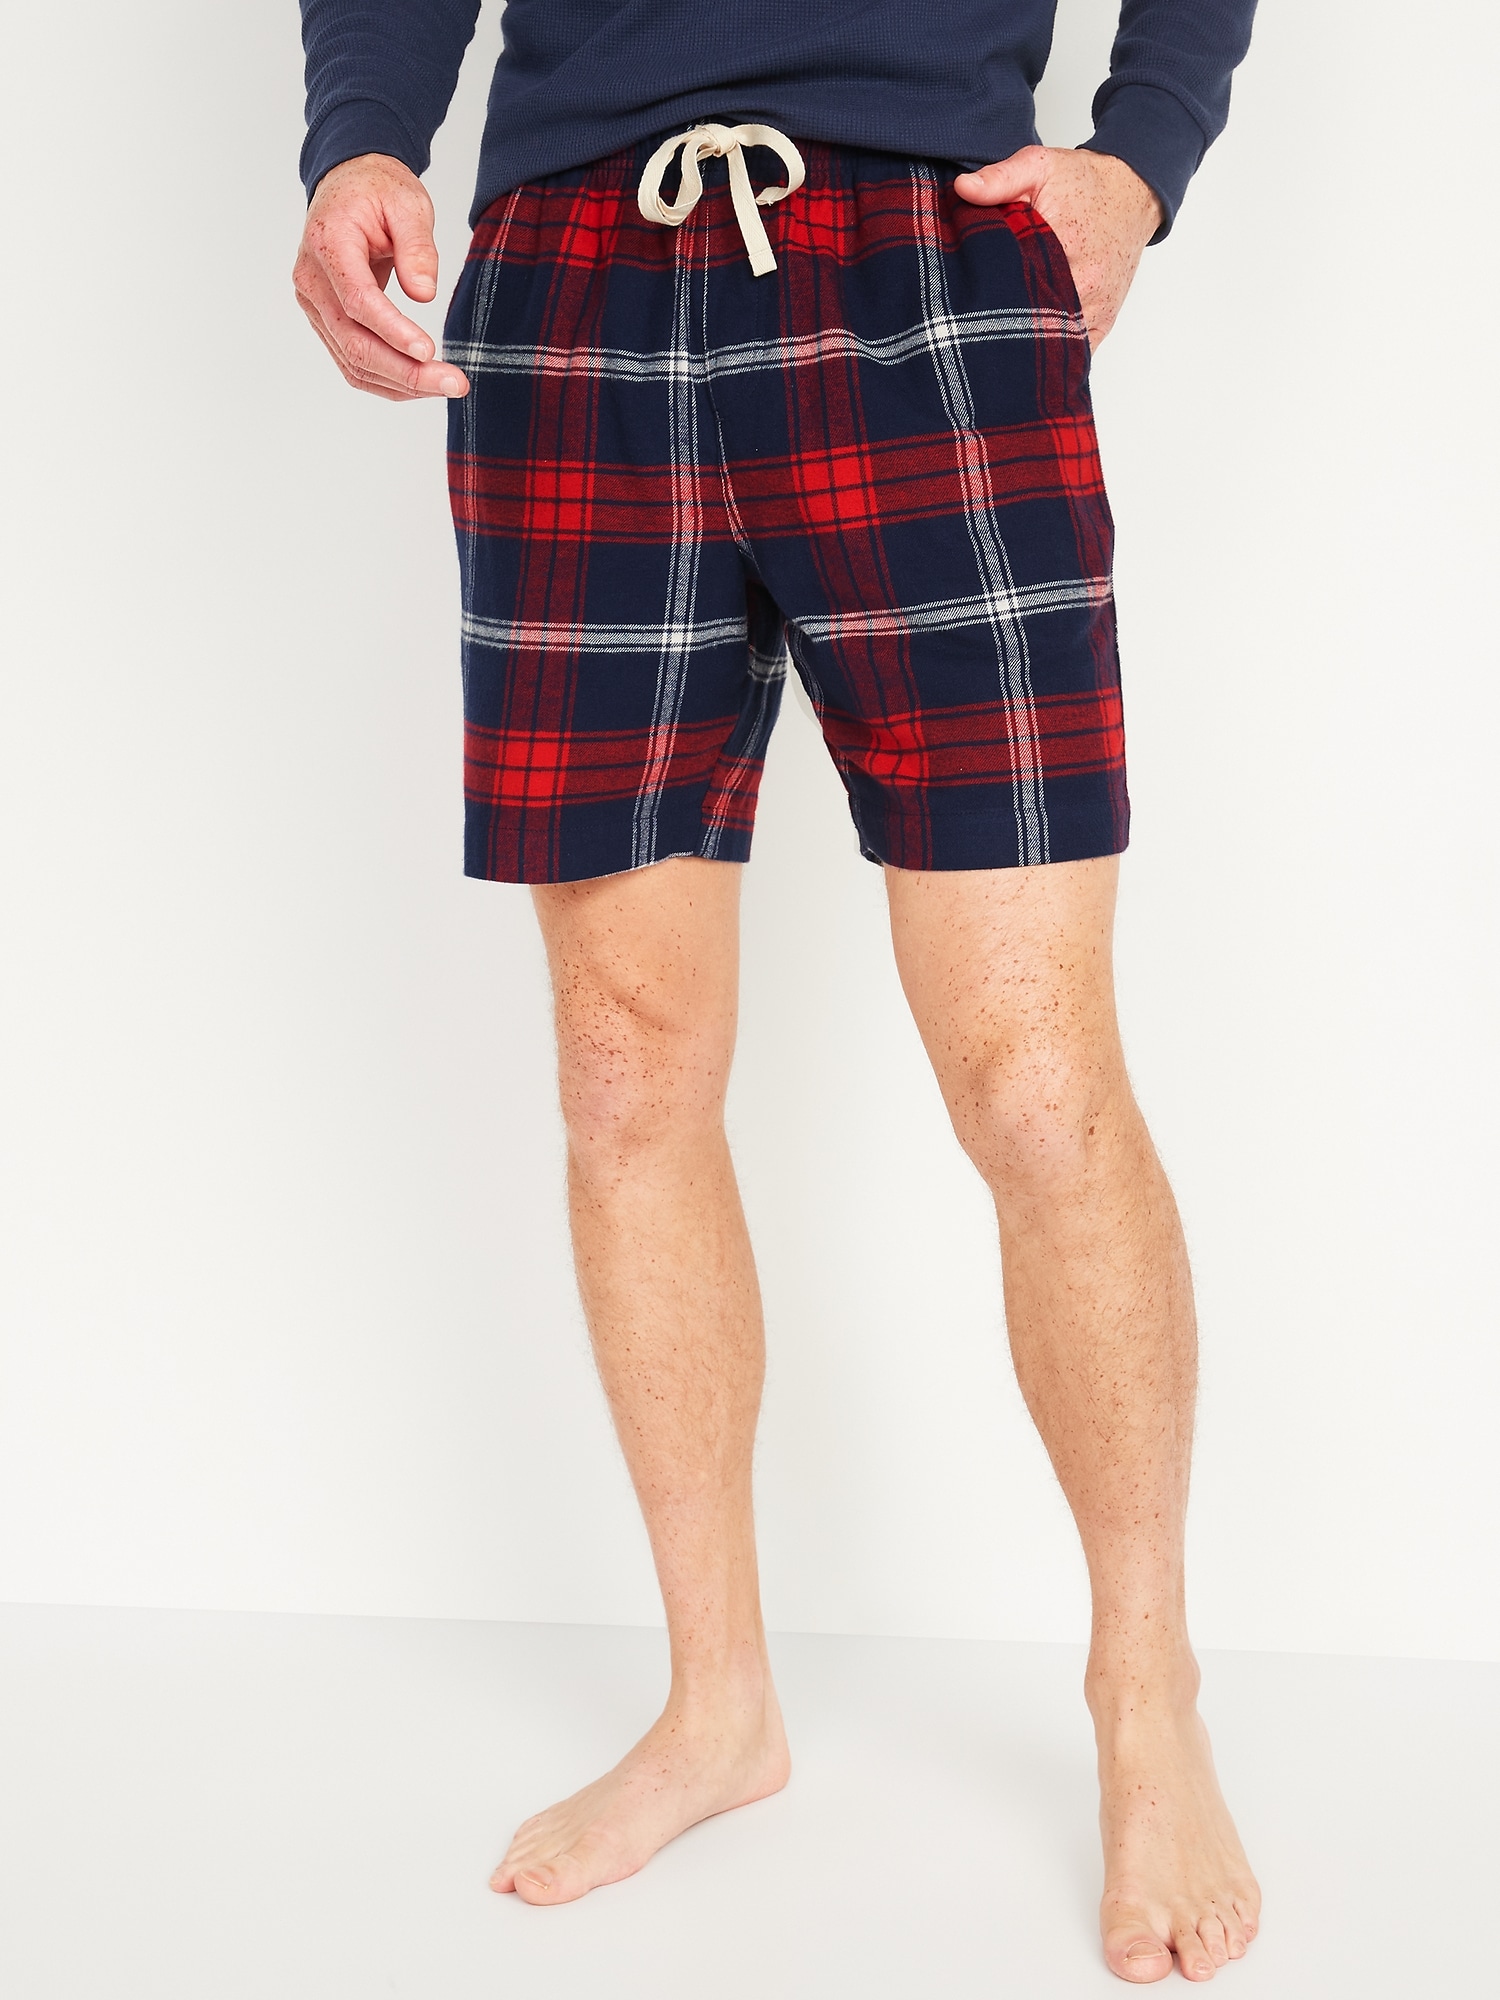 Old Navy Plaid Flannel Pajama Shorts for Men - 8-inch inseam Large Tall LT  New